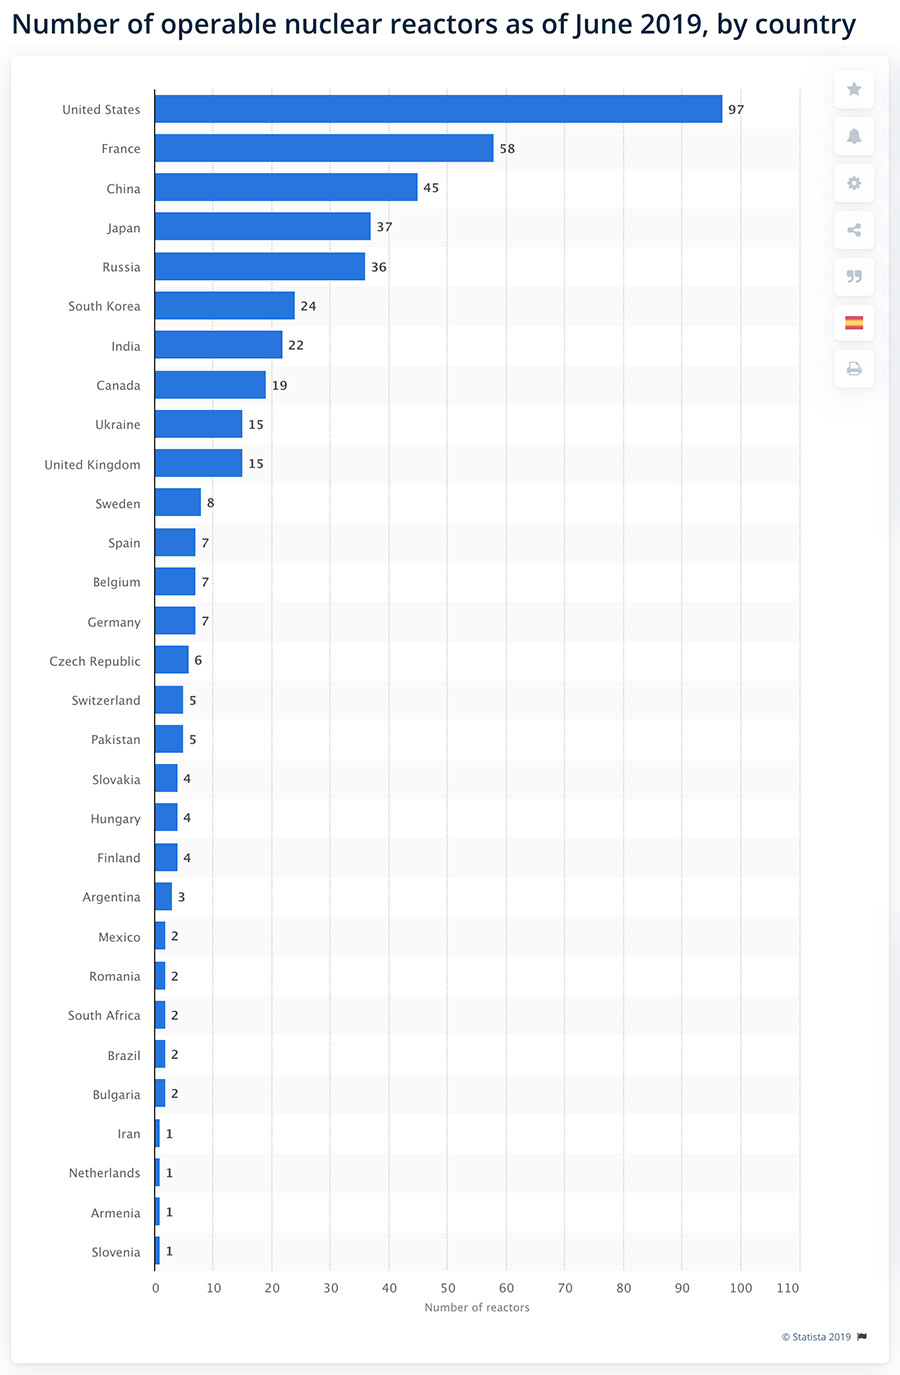 Number of operable nuclear reactors as of June 2019, by country